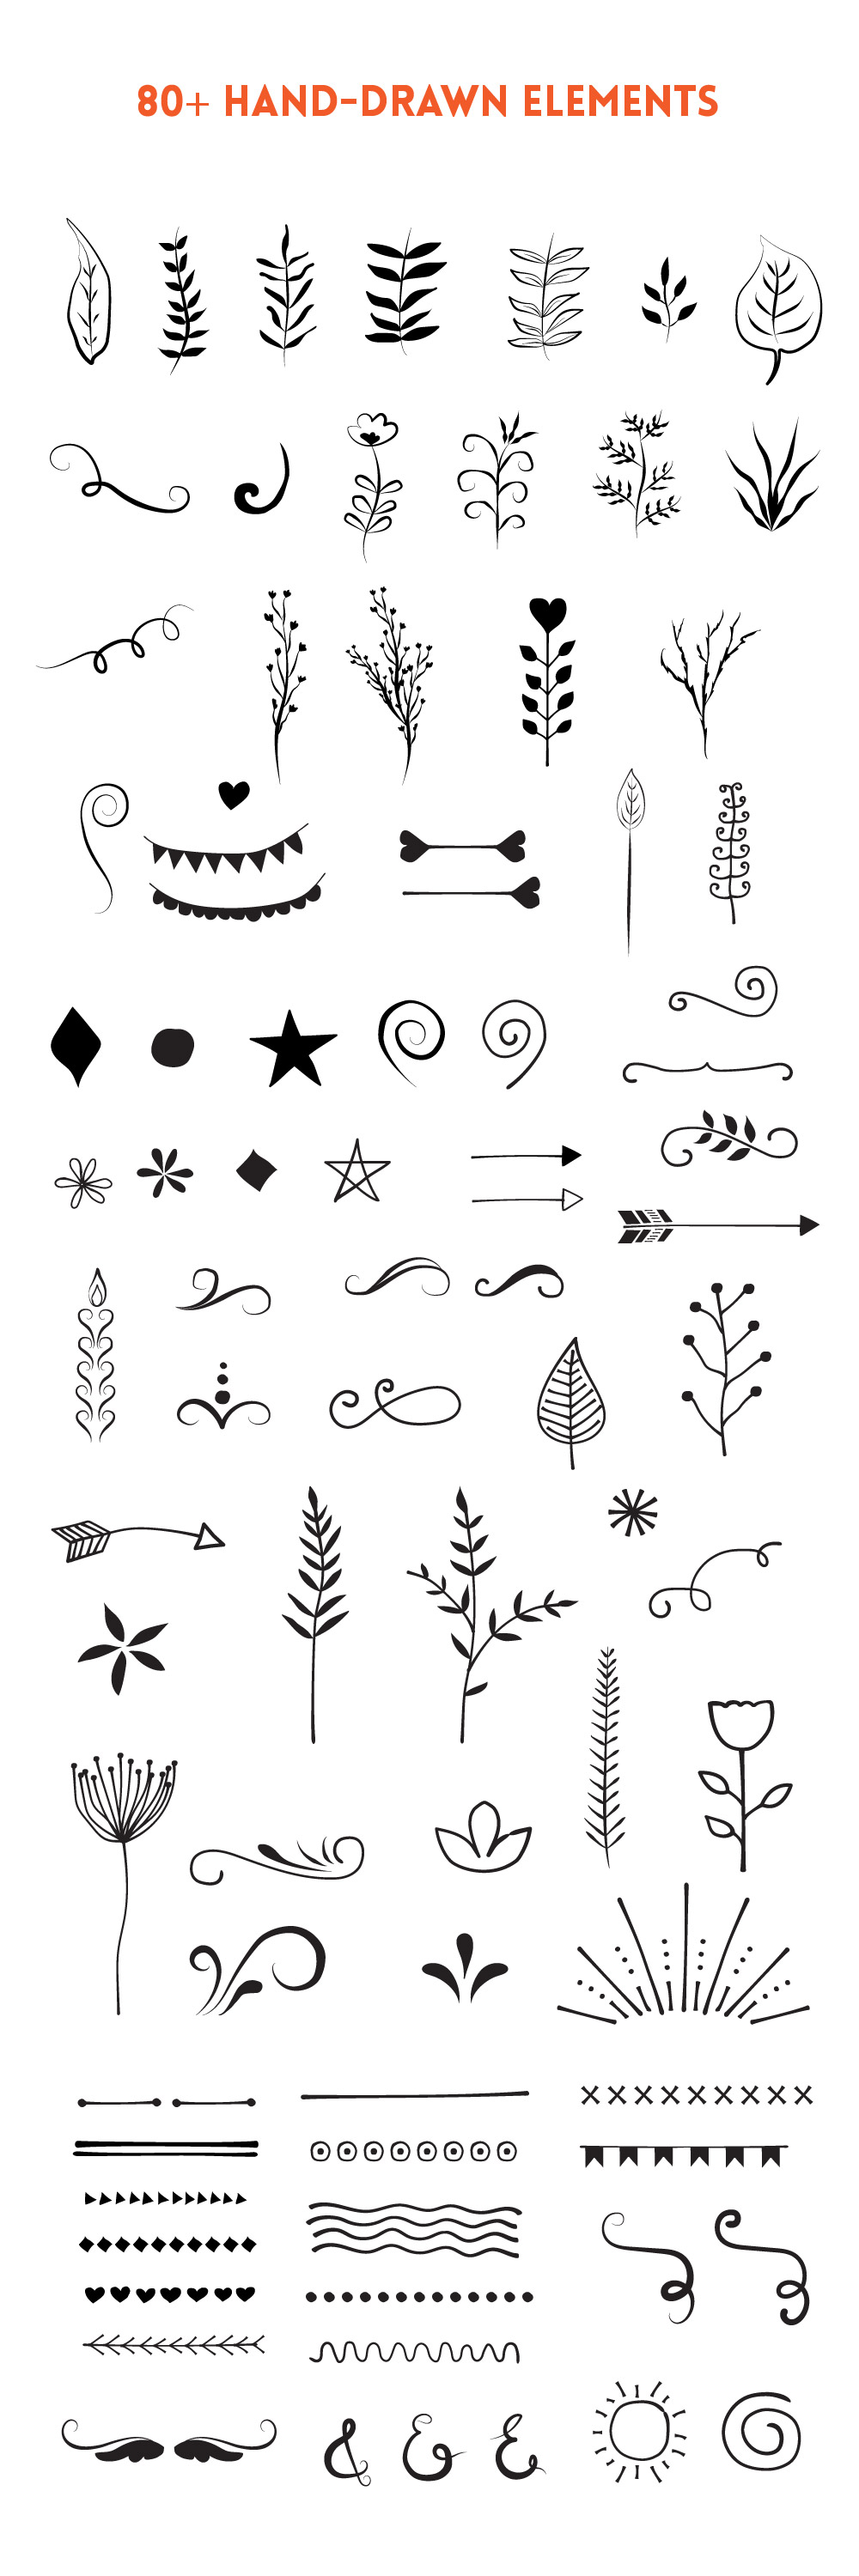 80+ Free Hand-Drawn Vector Elements - GraphicsFuel